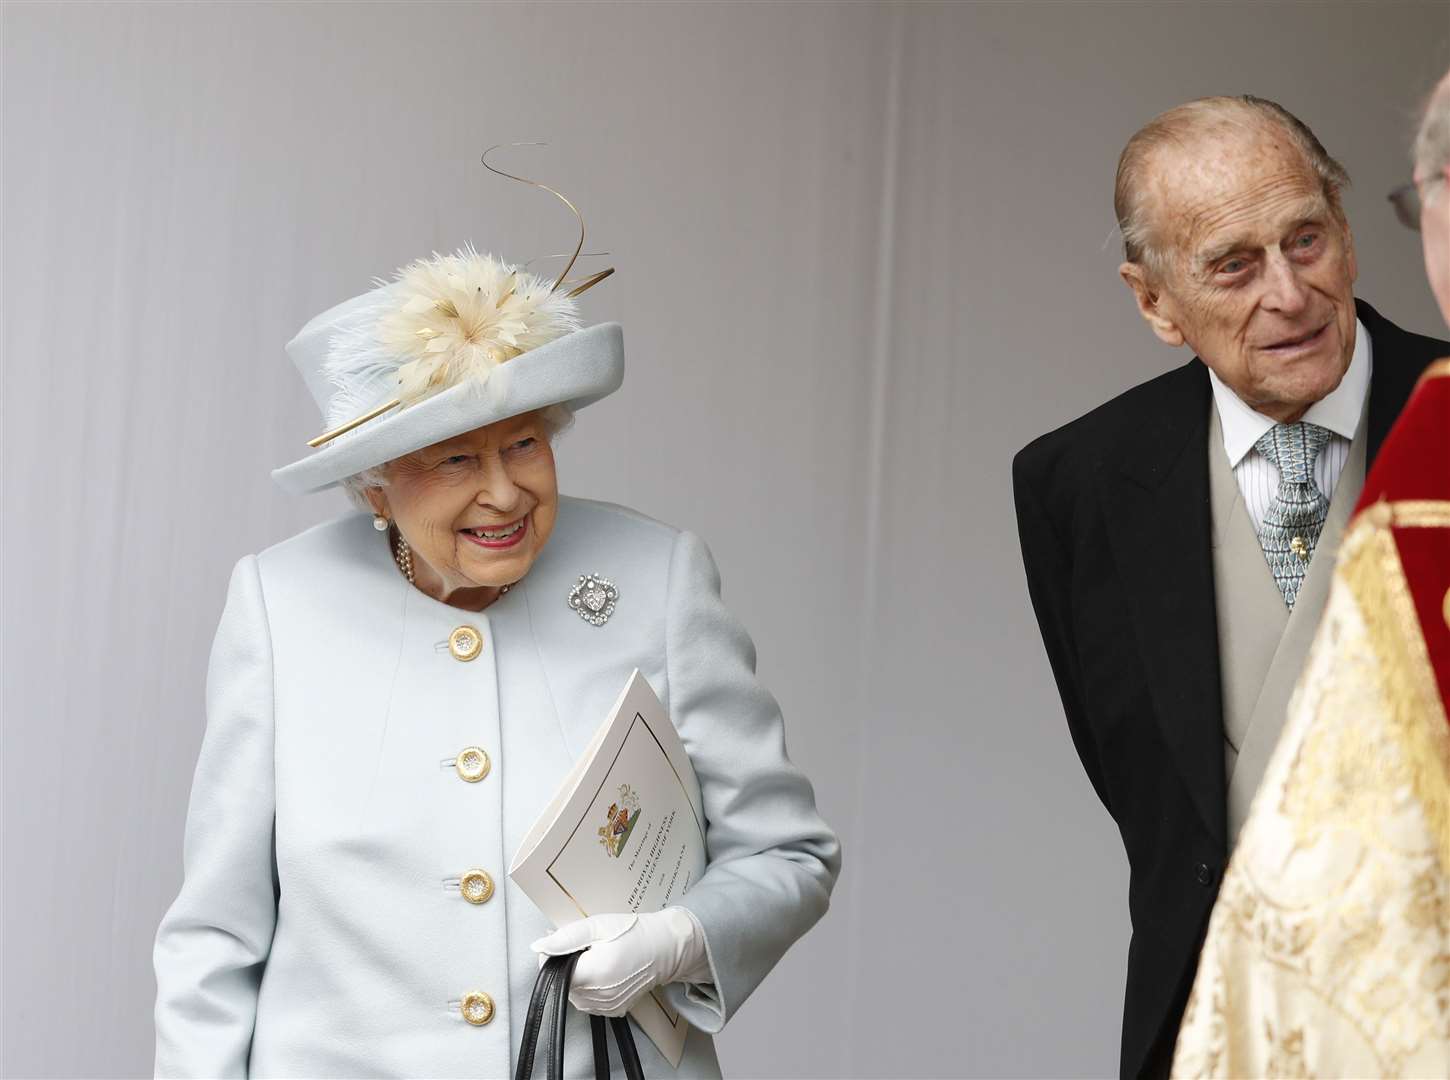 The Queen and the Duke of Edinburgh have been married for 73 years (Alastair Grant/PA)